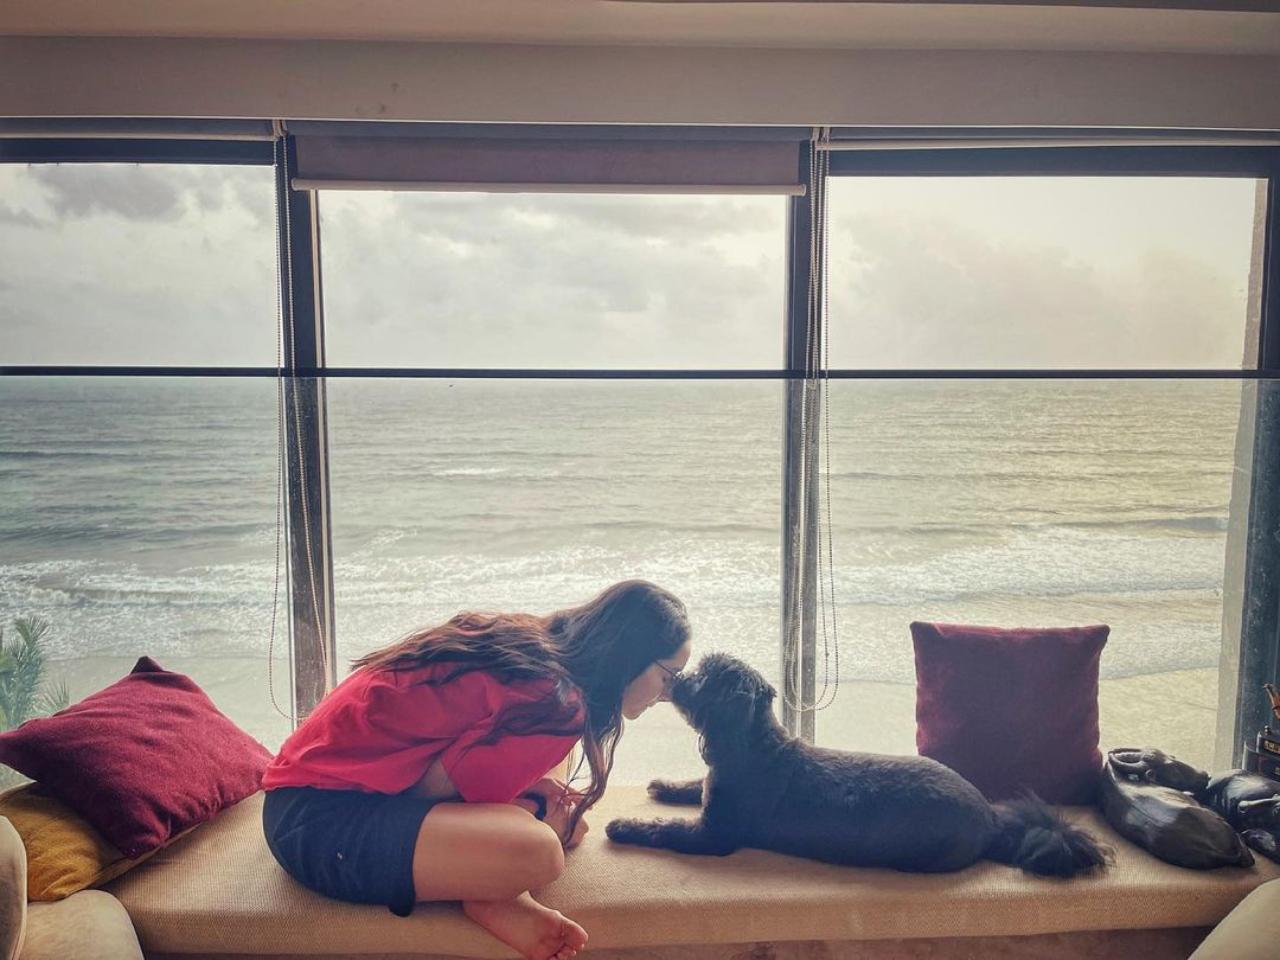 This picturesque picture of Shraddha enjoying 'monsoon snuggles' with Shyloh is all things adorable and heartwarming